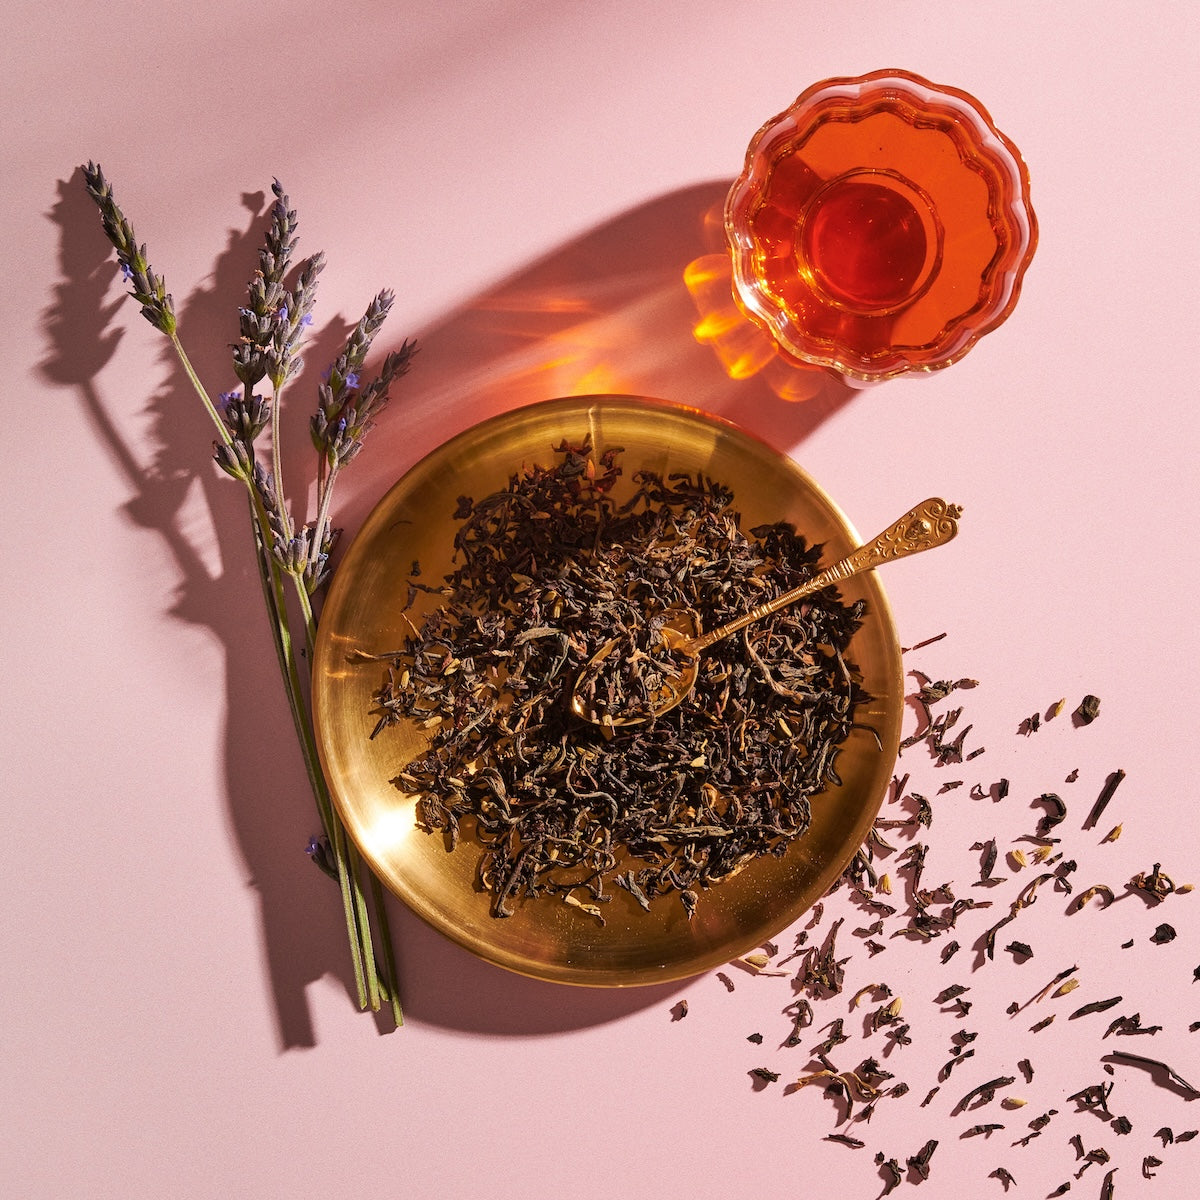 A brass plate filled with loose tea leaves and a brass spoon rests on a pink background. Next to the plate is a glass cup of Magic Hour&#39;s Goddess of Earl: Lavender London Fog - Tea for Blooming Clarity &amp; Calm Moods, with some lavender sprigs lying adjacent. Tea leaves are scattered around the plate, enhancing the scene&#39;s relaxation and calm focus.